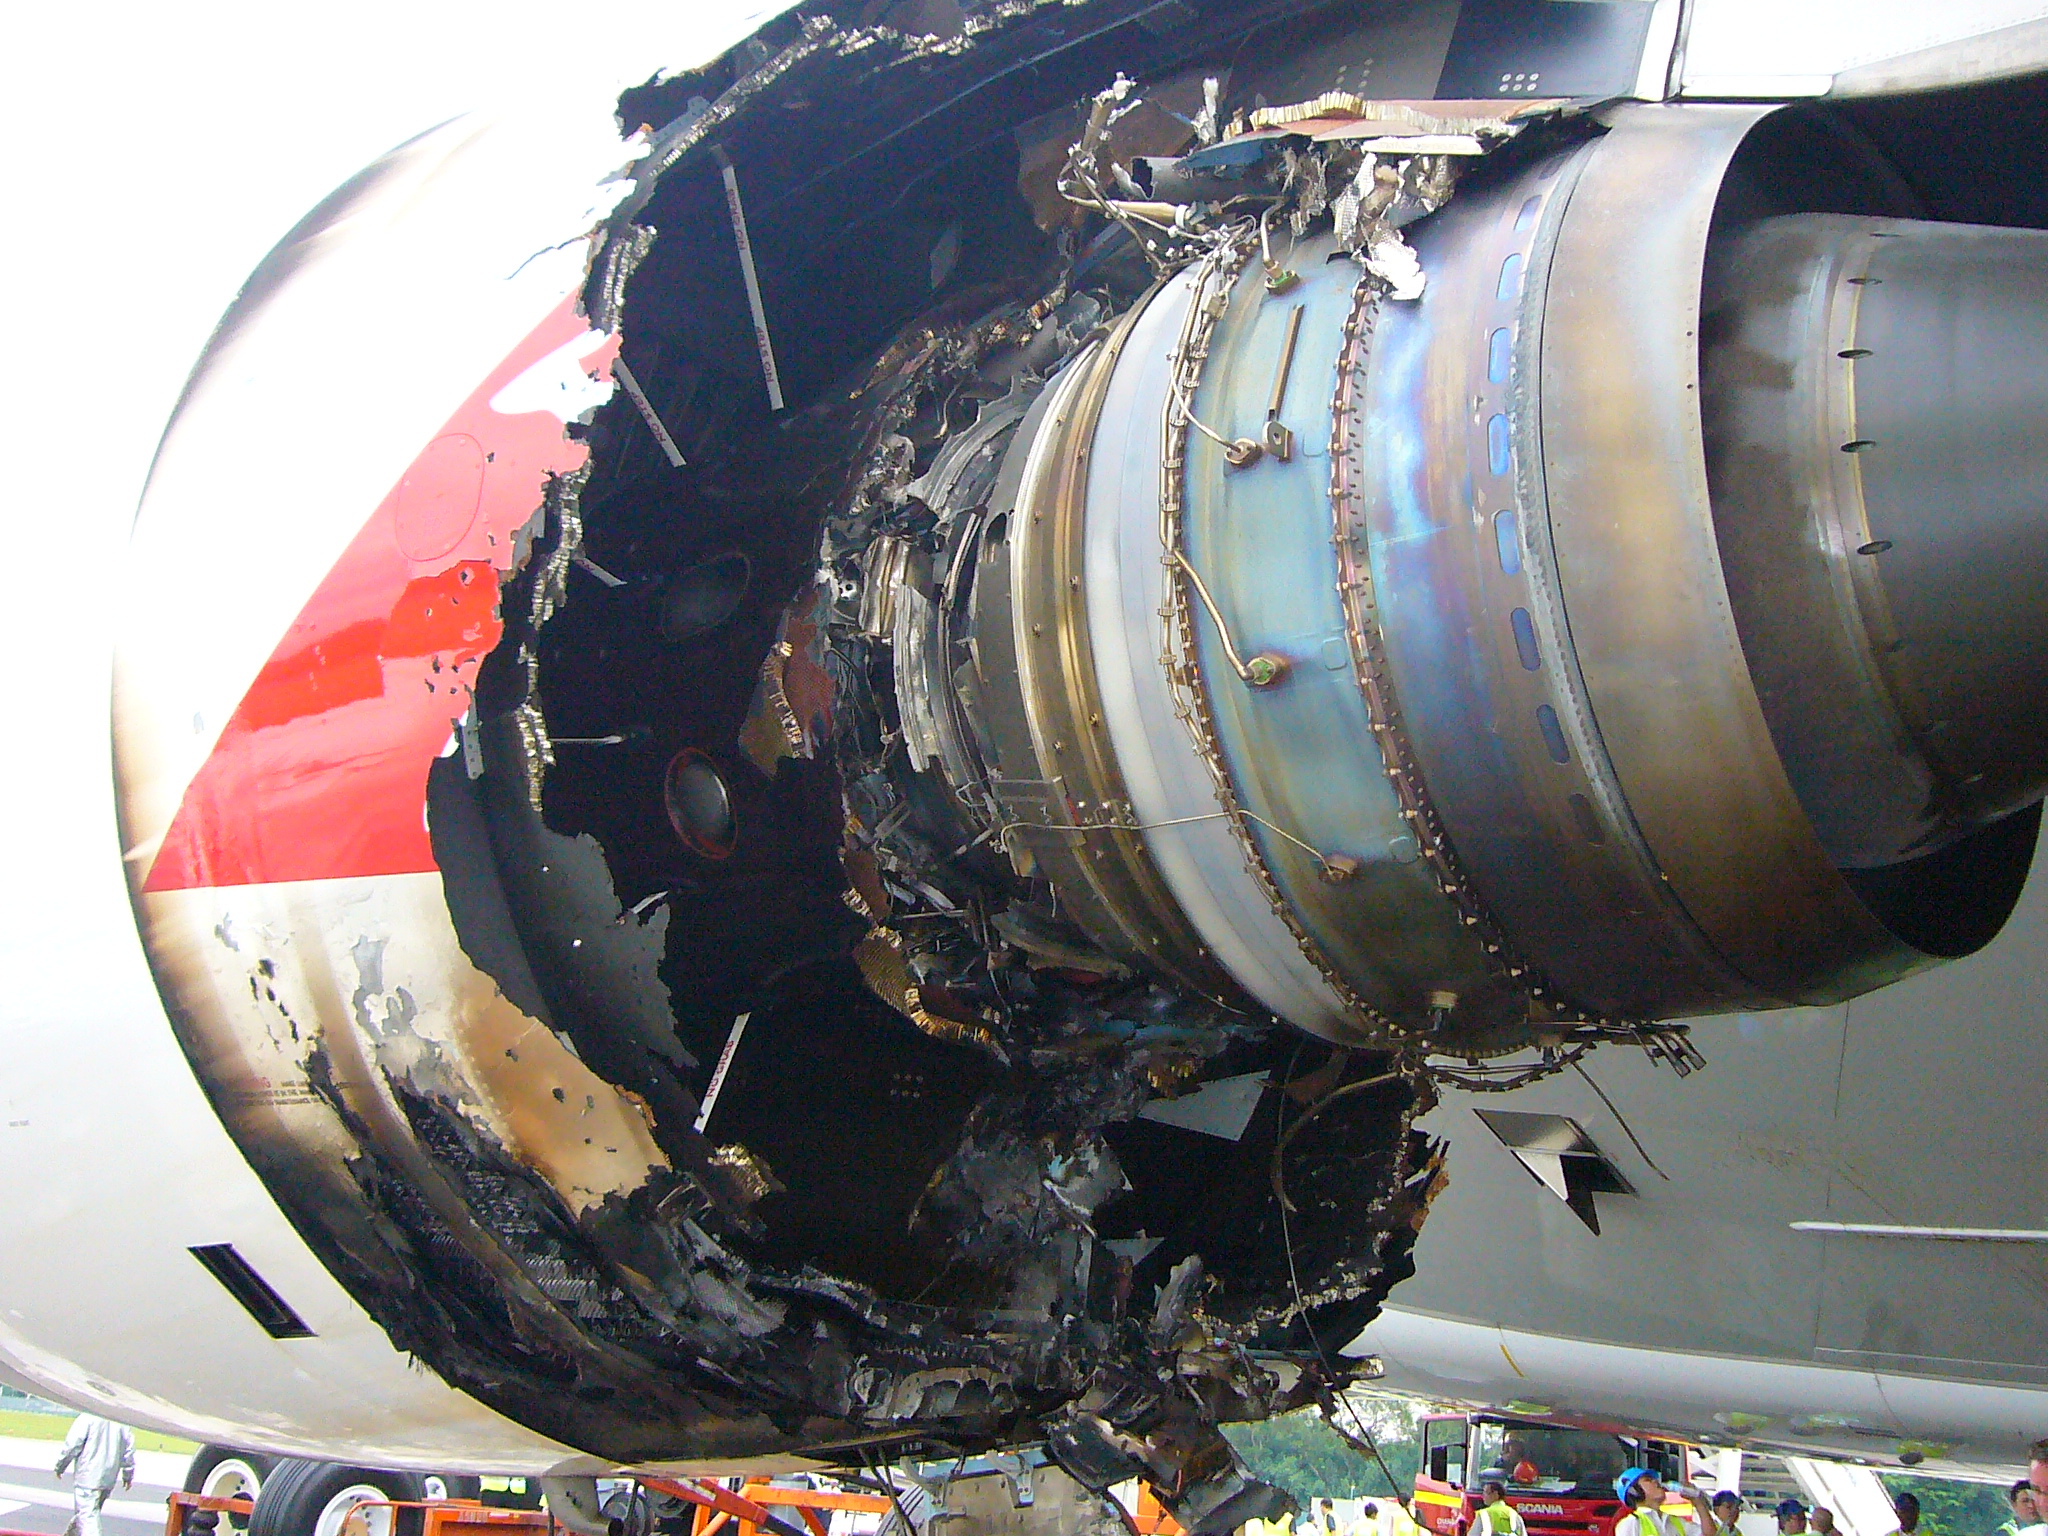 The broken engine of the A380